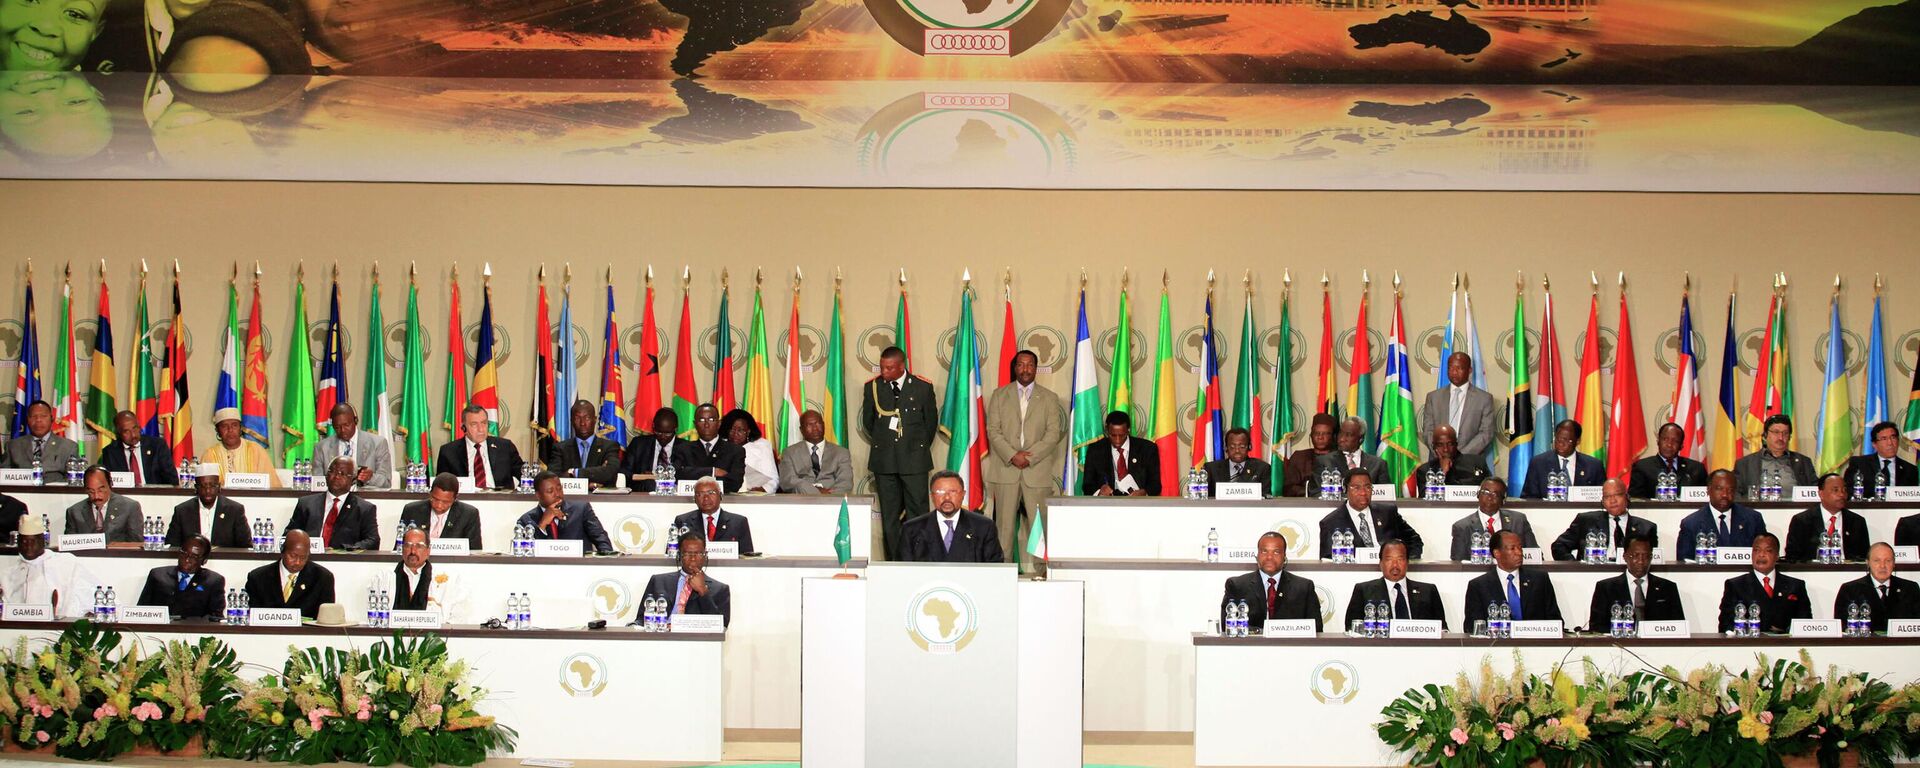 African heads of state and country representatives listen as African Union Commission Chairman Jean Ping speaks during the opening session of the 17th African Union Summit, at Sipopo Conference Center, outside Malabo, Equatorial Guinea, Thursday, June 30, 2011. - Sputnik Africa, 1920, 17.08.2023